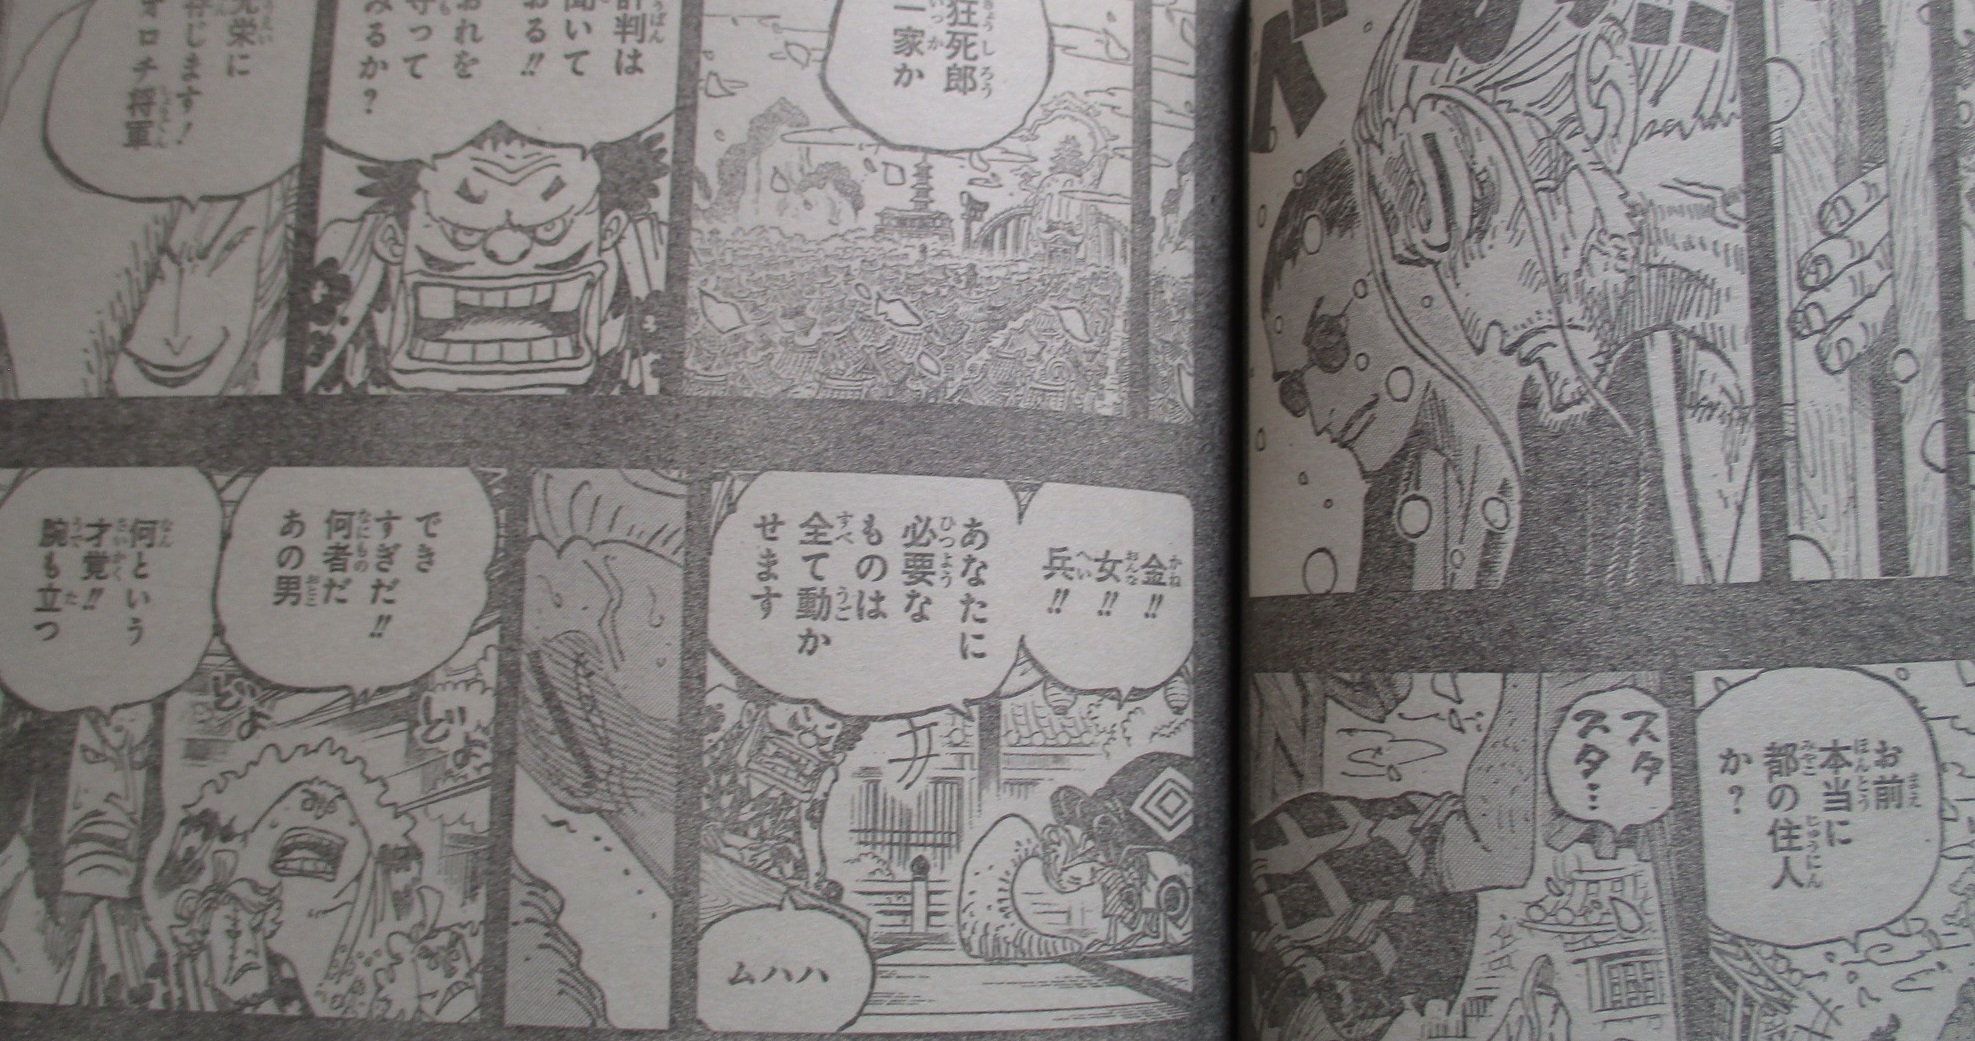 Spoiler One Piece Chapter 973 Spoilers Discussion Page 15 Worstgen